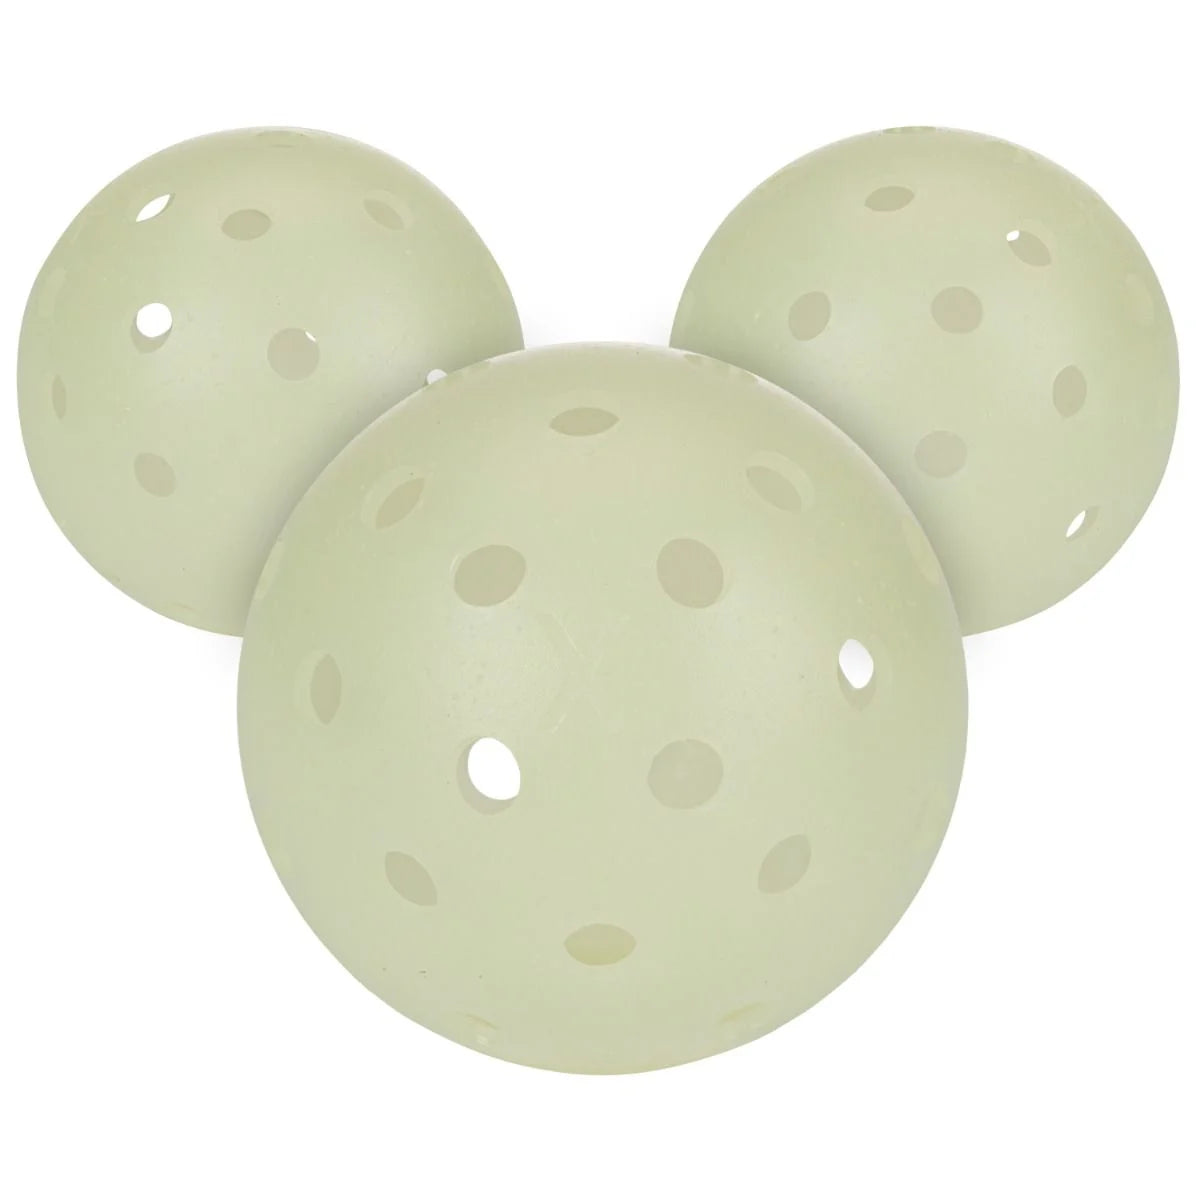 A set of three Franklin X-40 Glow-In-The-Dark Pickleball Balls with dots on them.